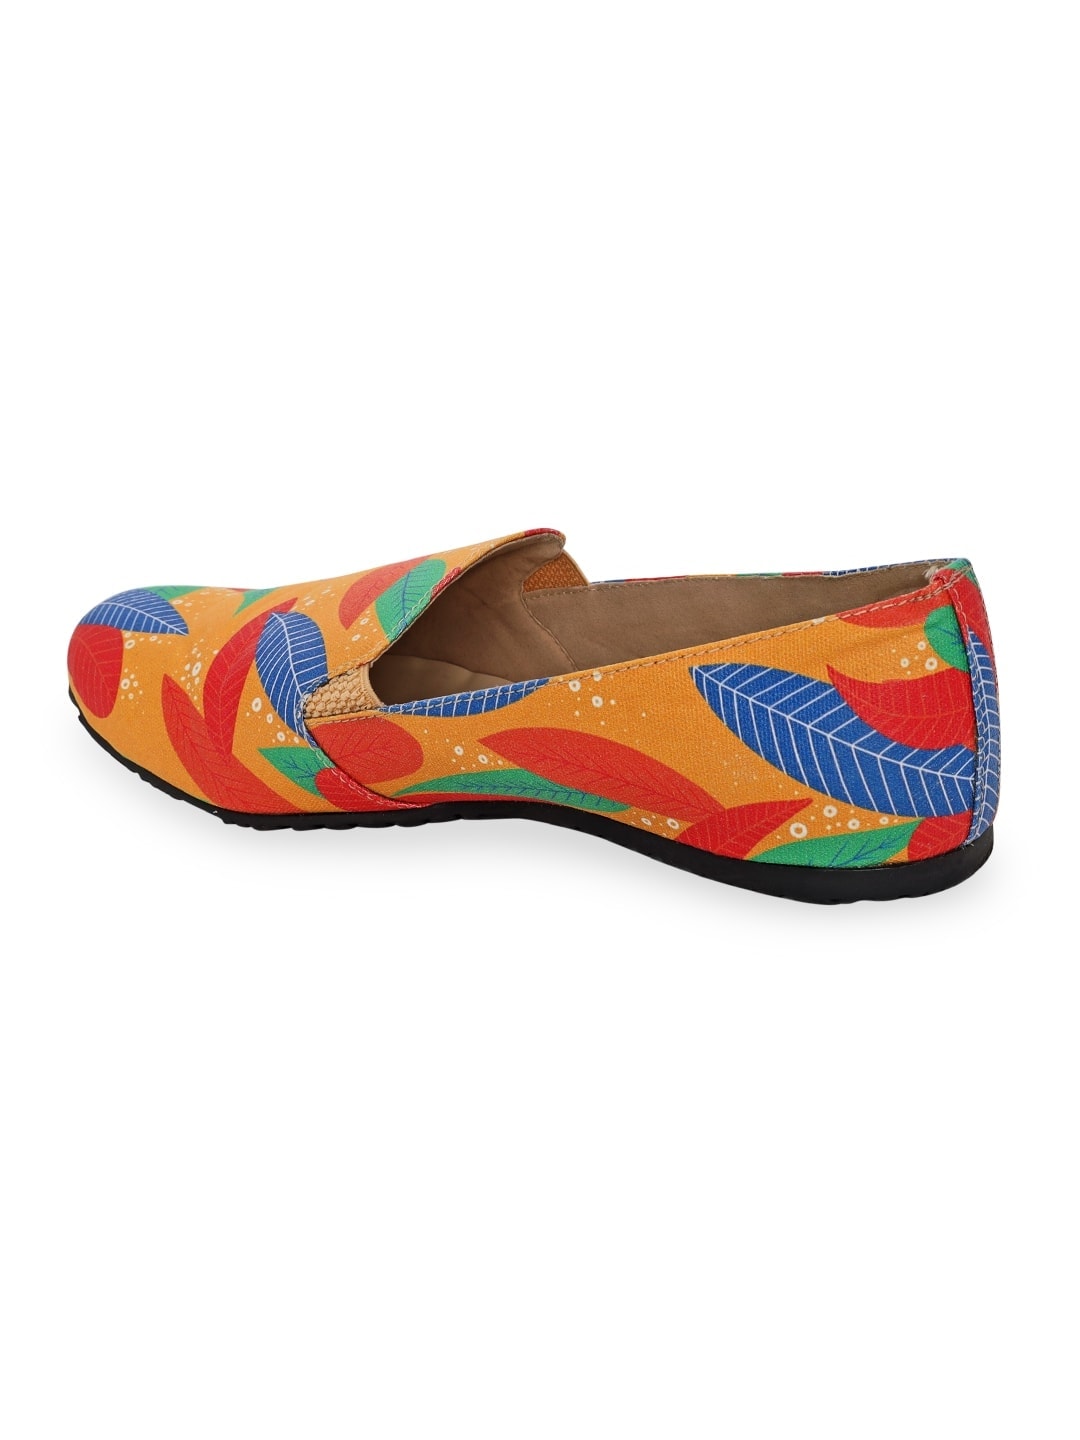 Ray Of Hope Moccasin Shoes